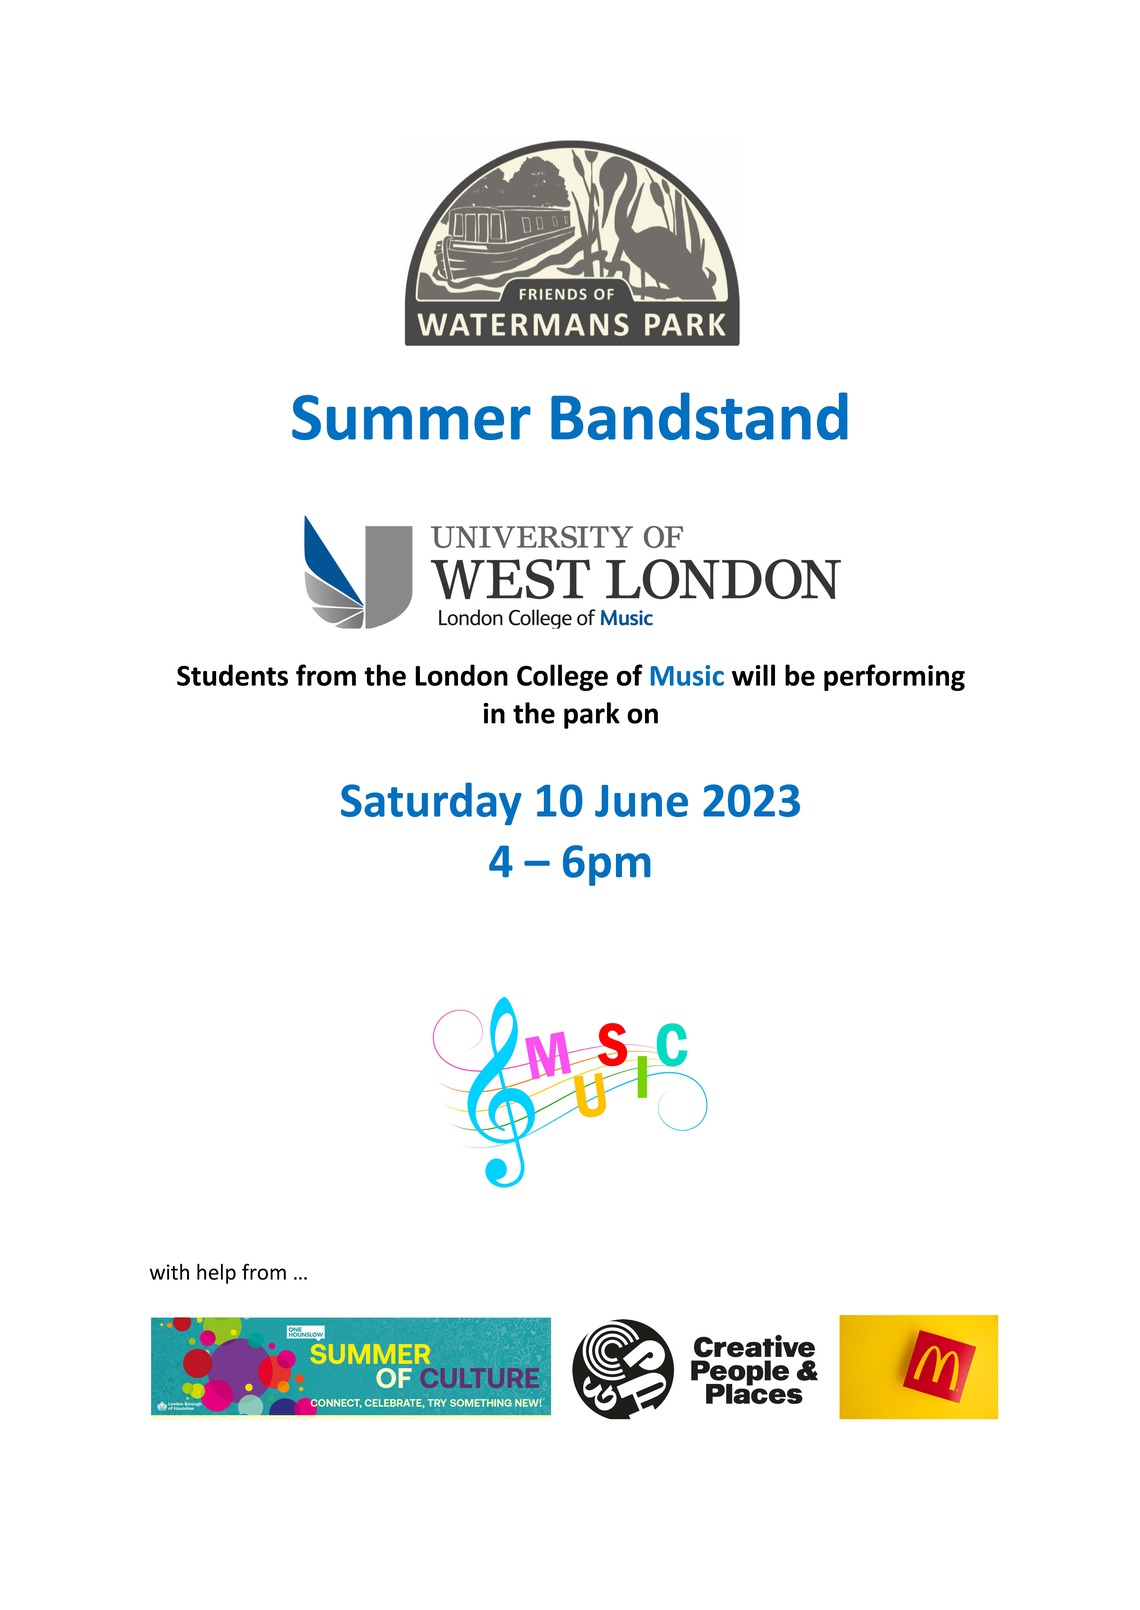 Summer Bandstand with UWL's London College of Music